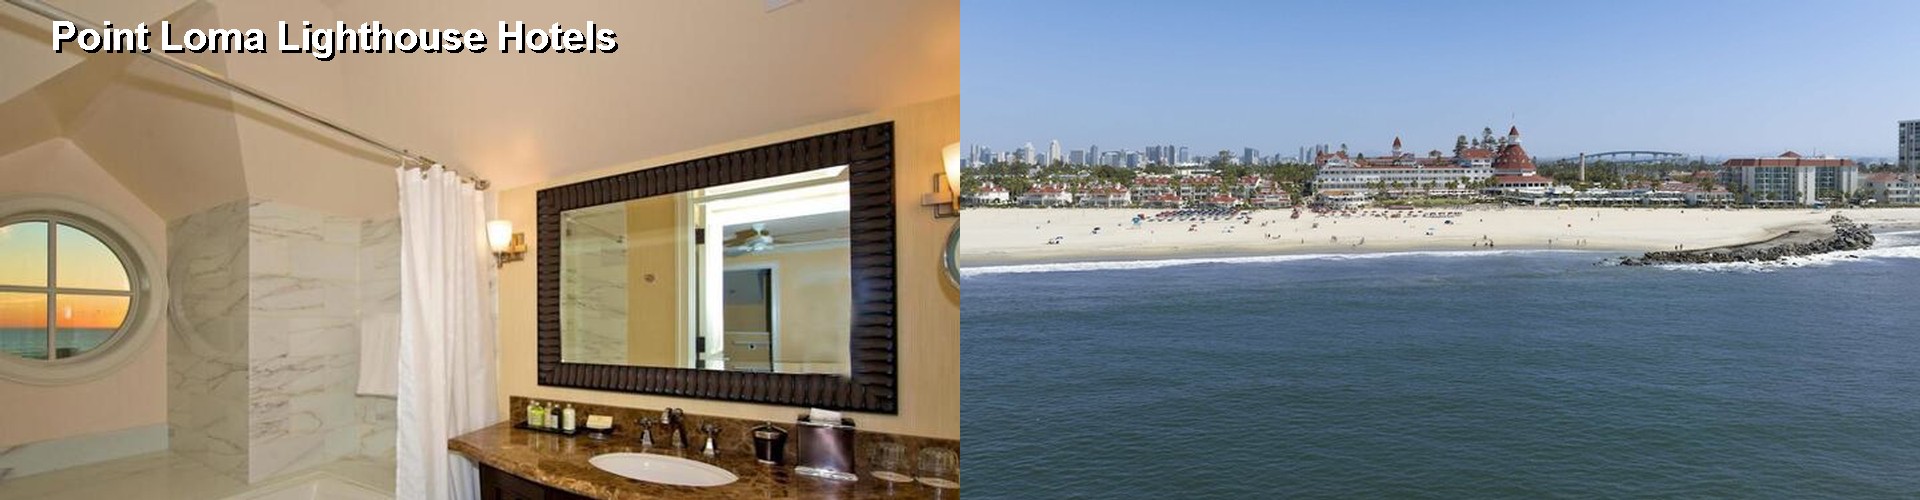 5 Best Hotels near Point Loma Lighthouse